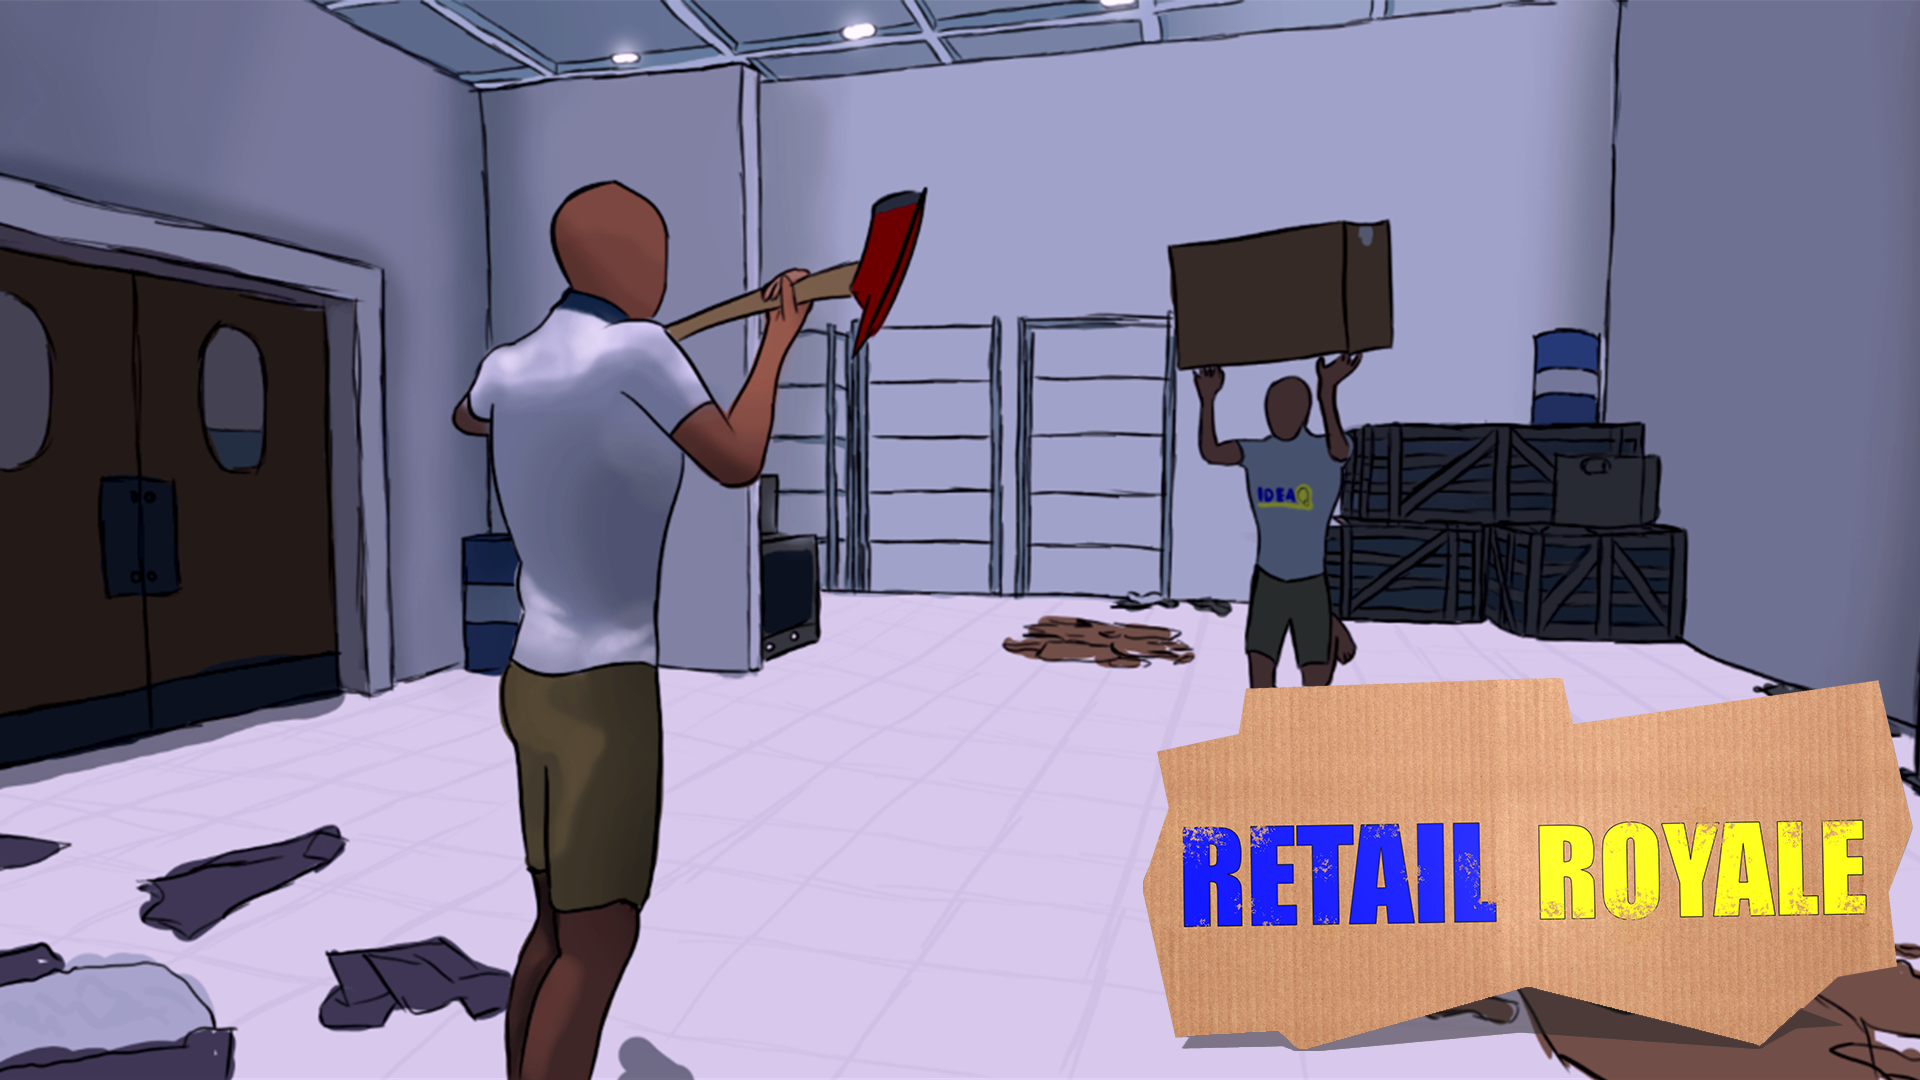 Retail Royale Update 1.0.3 Patch Notes – May 5, 2022